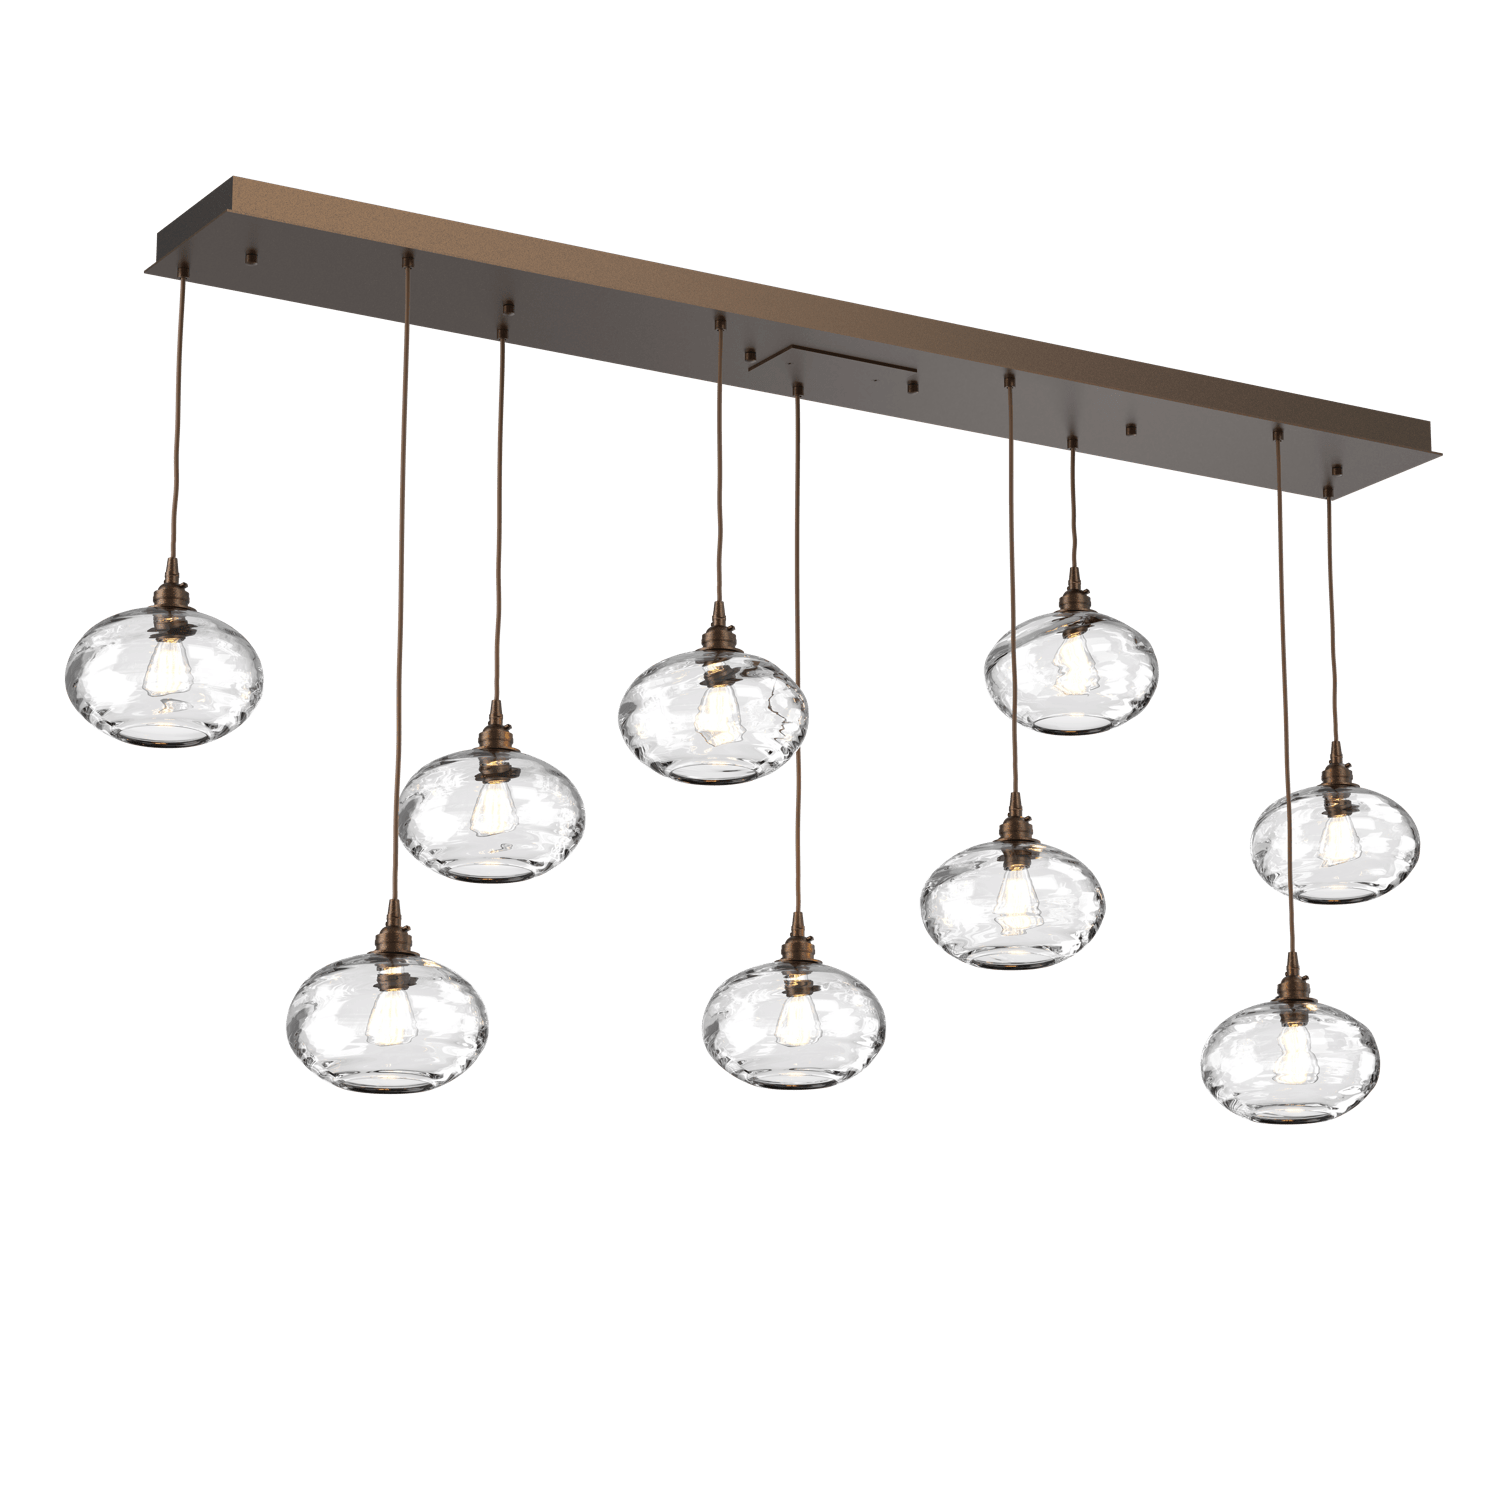 PLB0036-09-FB-OC-Hammerton-Studio-Optic-Blown-Glass-Coppa-9-light-linear-pendant-chandelier-with-flat-bronze-finish-and-optic-clear-blown-glass-shades-and-incandescent-lamping